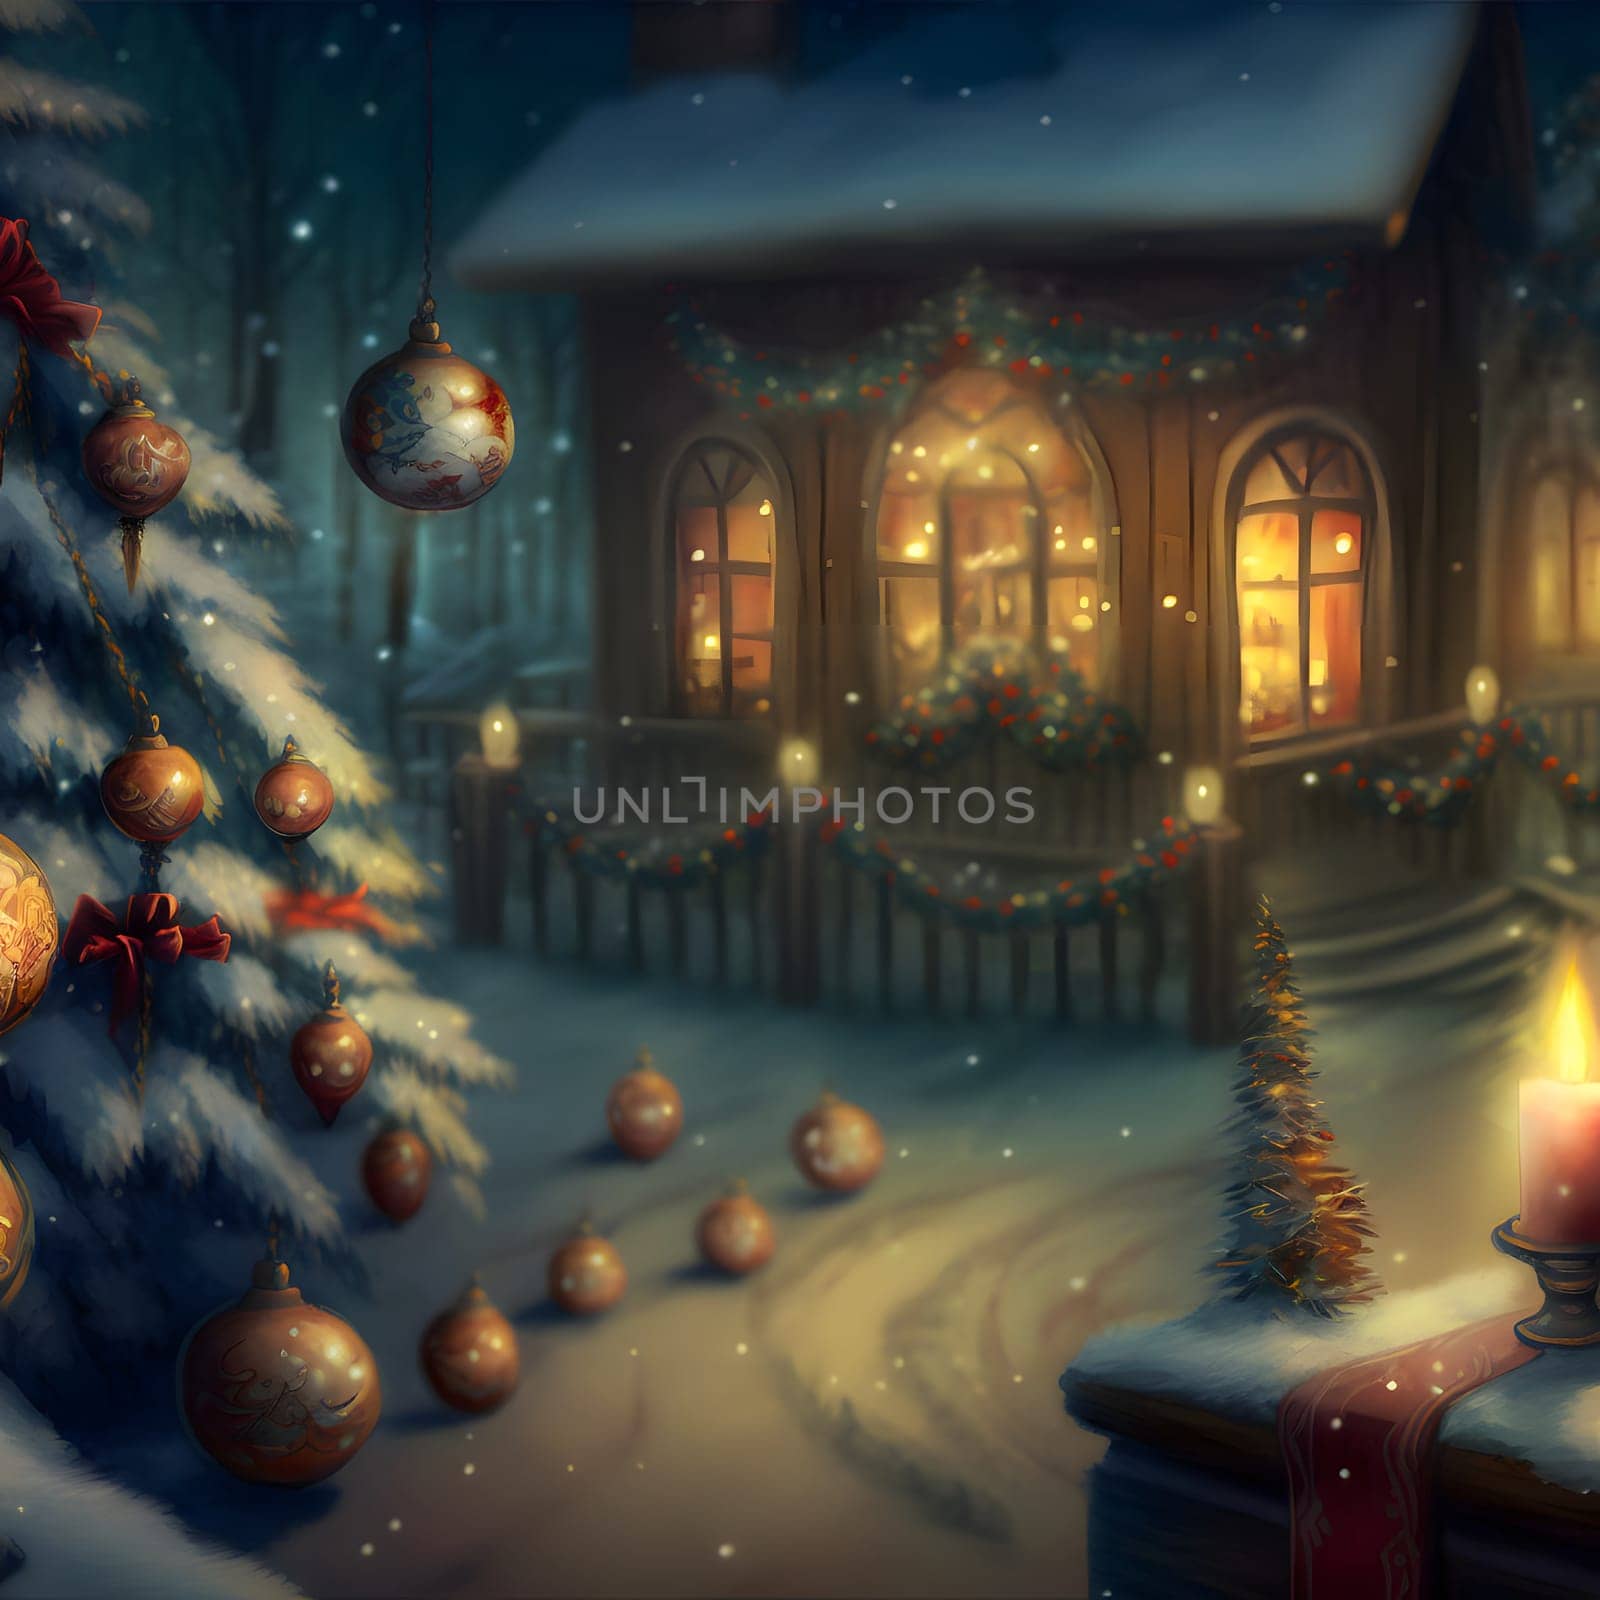 cozy fairytale winter house at snowy night, neural network generated art. Digitally generated image. Not based on any actual scene or pattern.